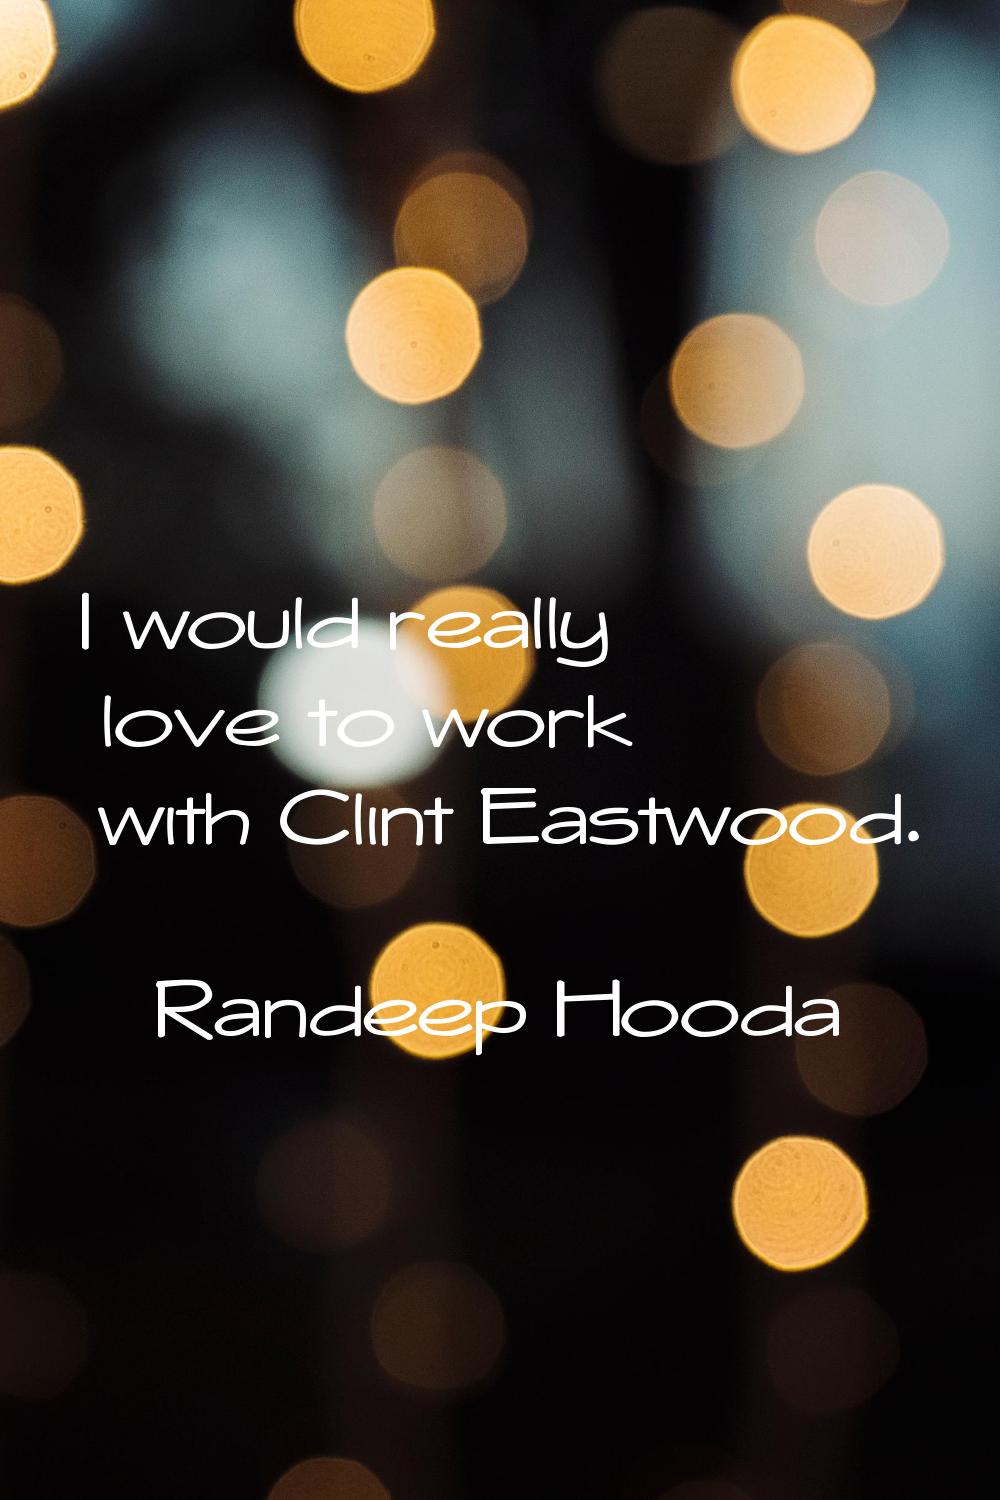 I would really love to work with Clint Eastwood.